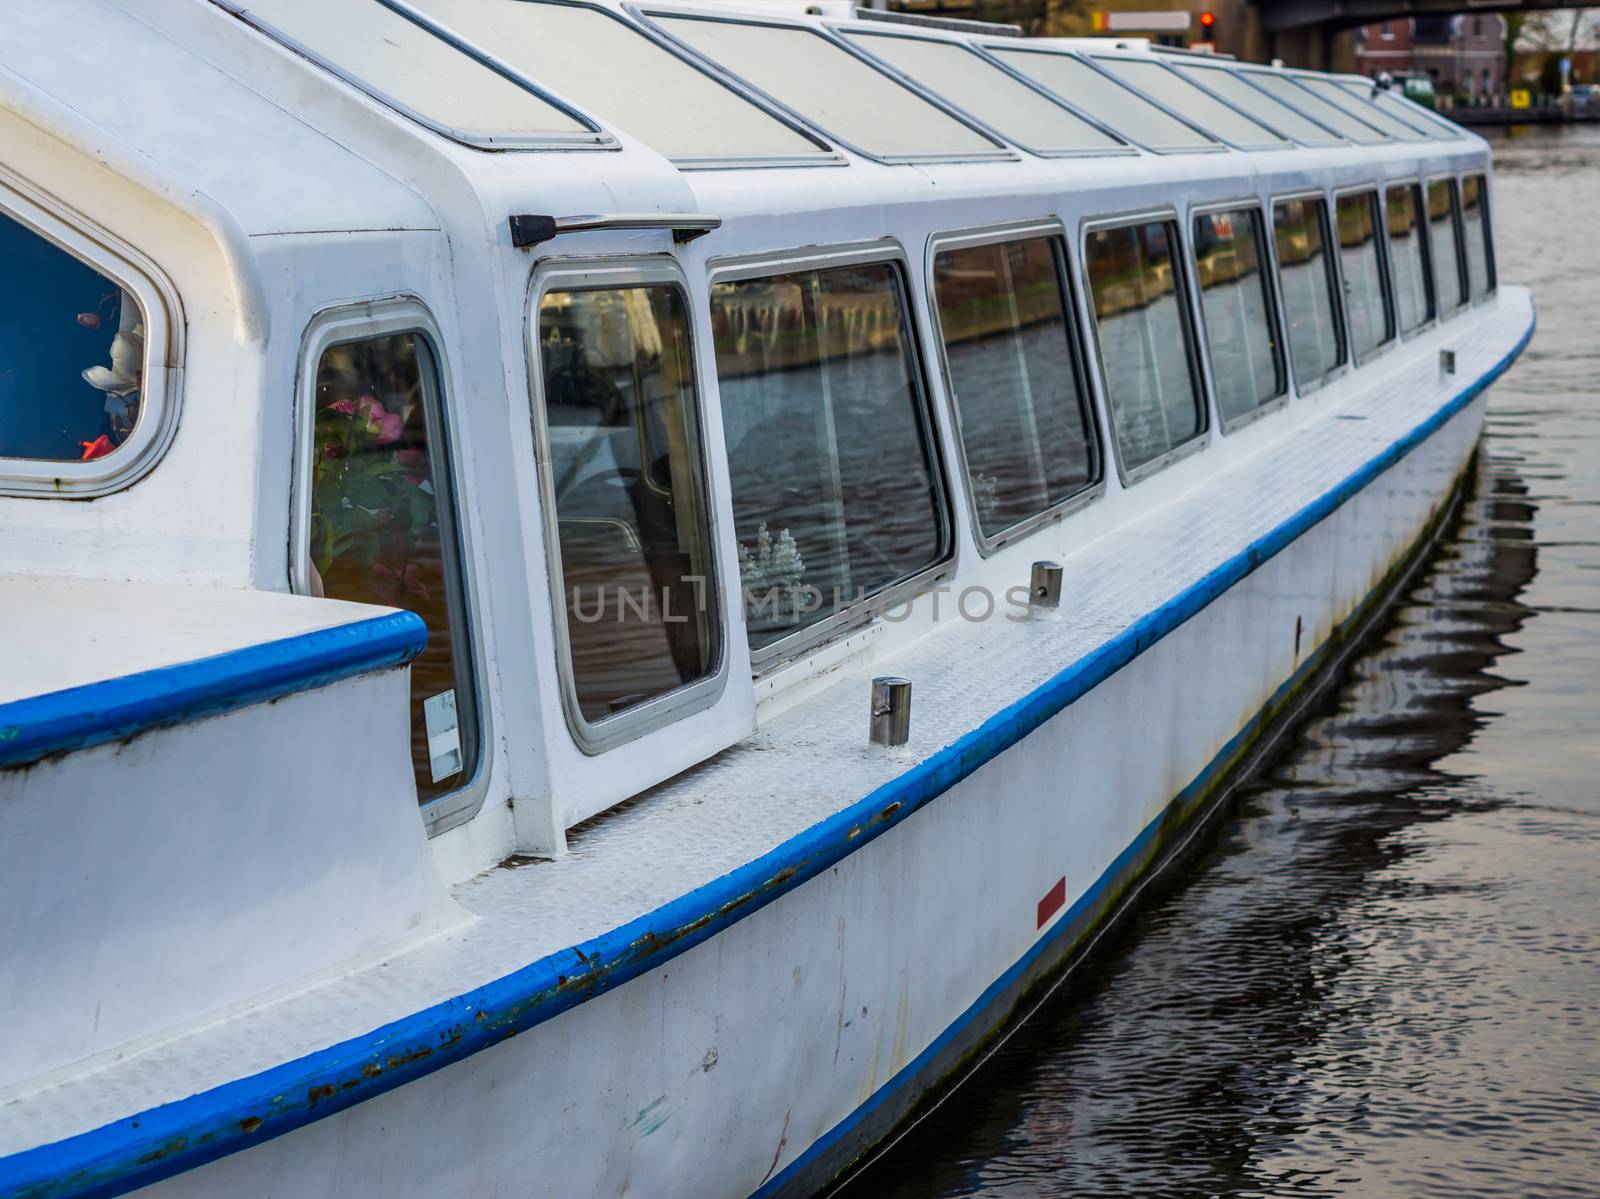 exterior of a touring boat, tourism concept, vehicle exteriors, water transportation